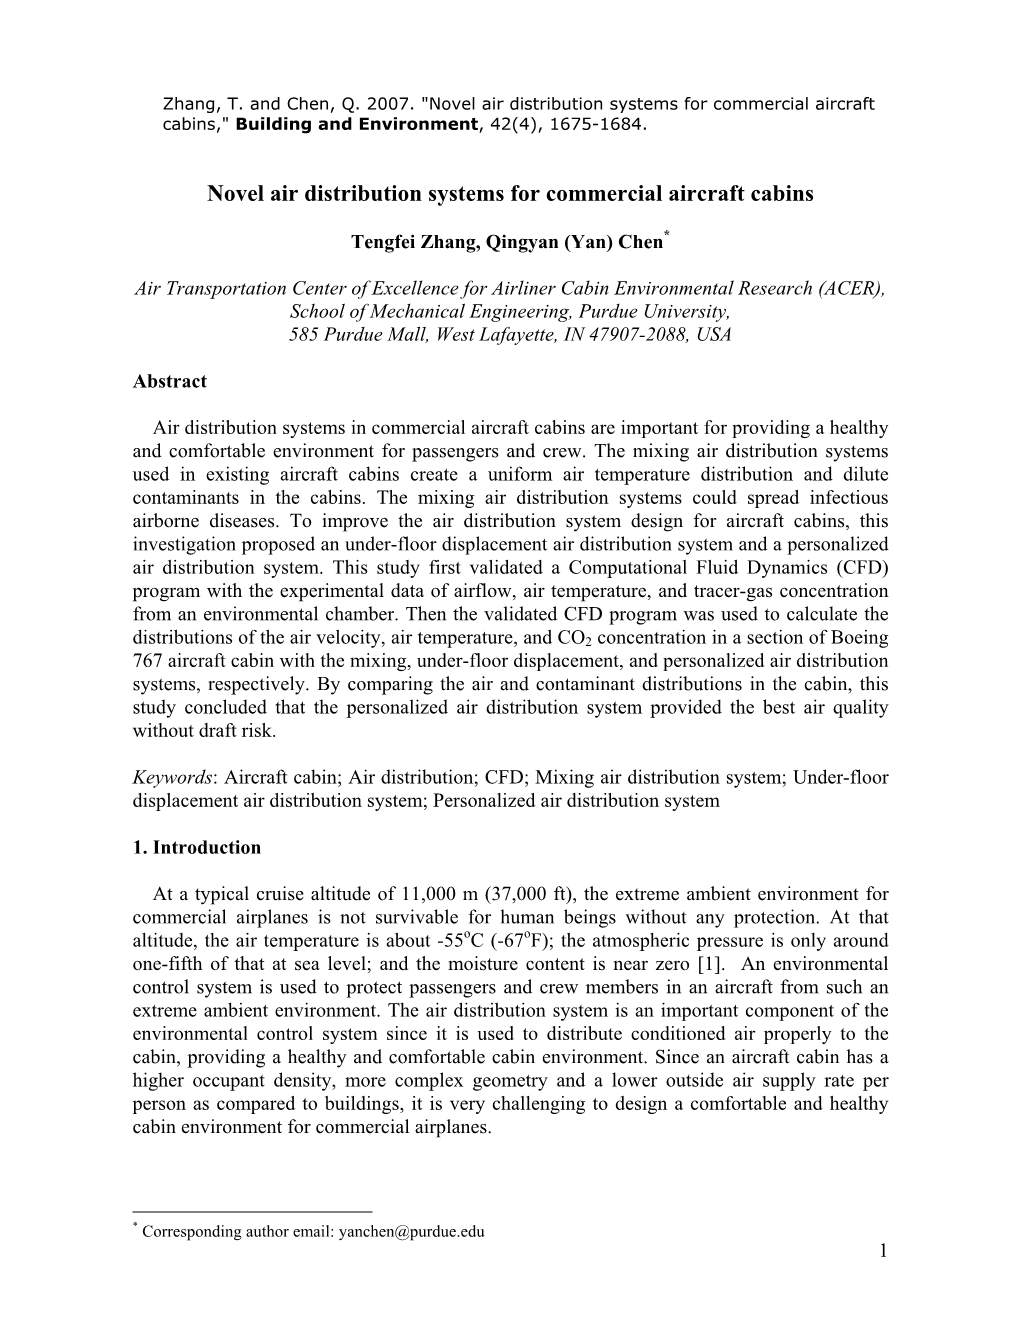 Novel Air Distribution Systems for Commercial Aircraft Cabins," Building and Environment, 42(4), 1675-1684